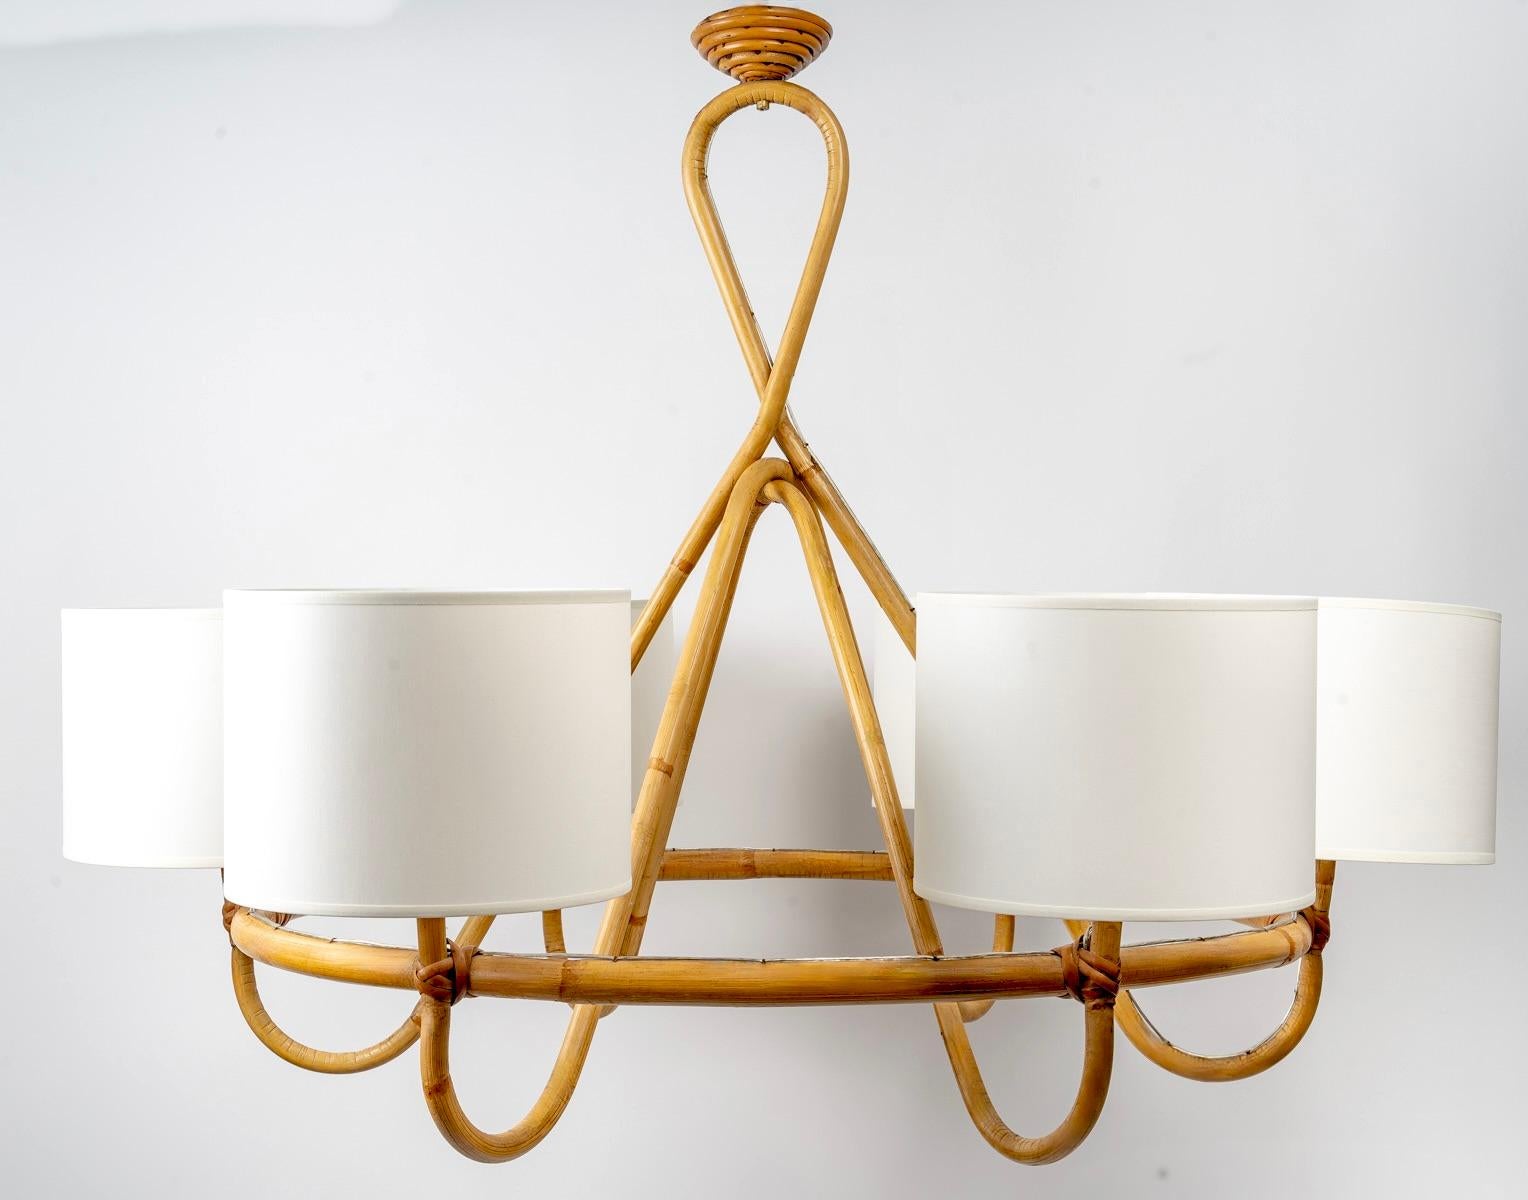 Mid-20th Century 1950 Rattan Chandelier by Louis Sognot